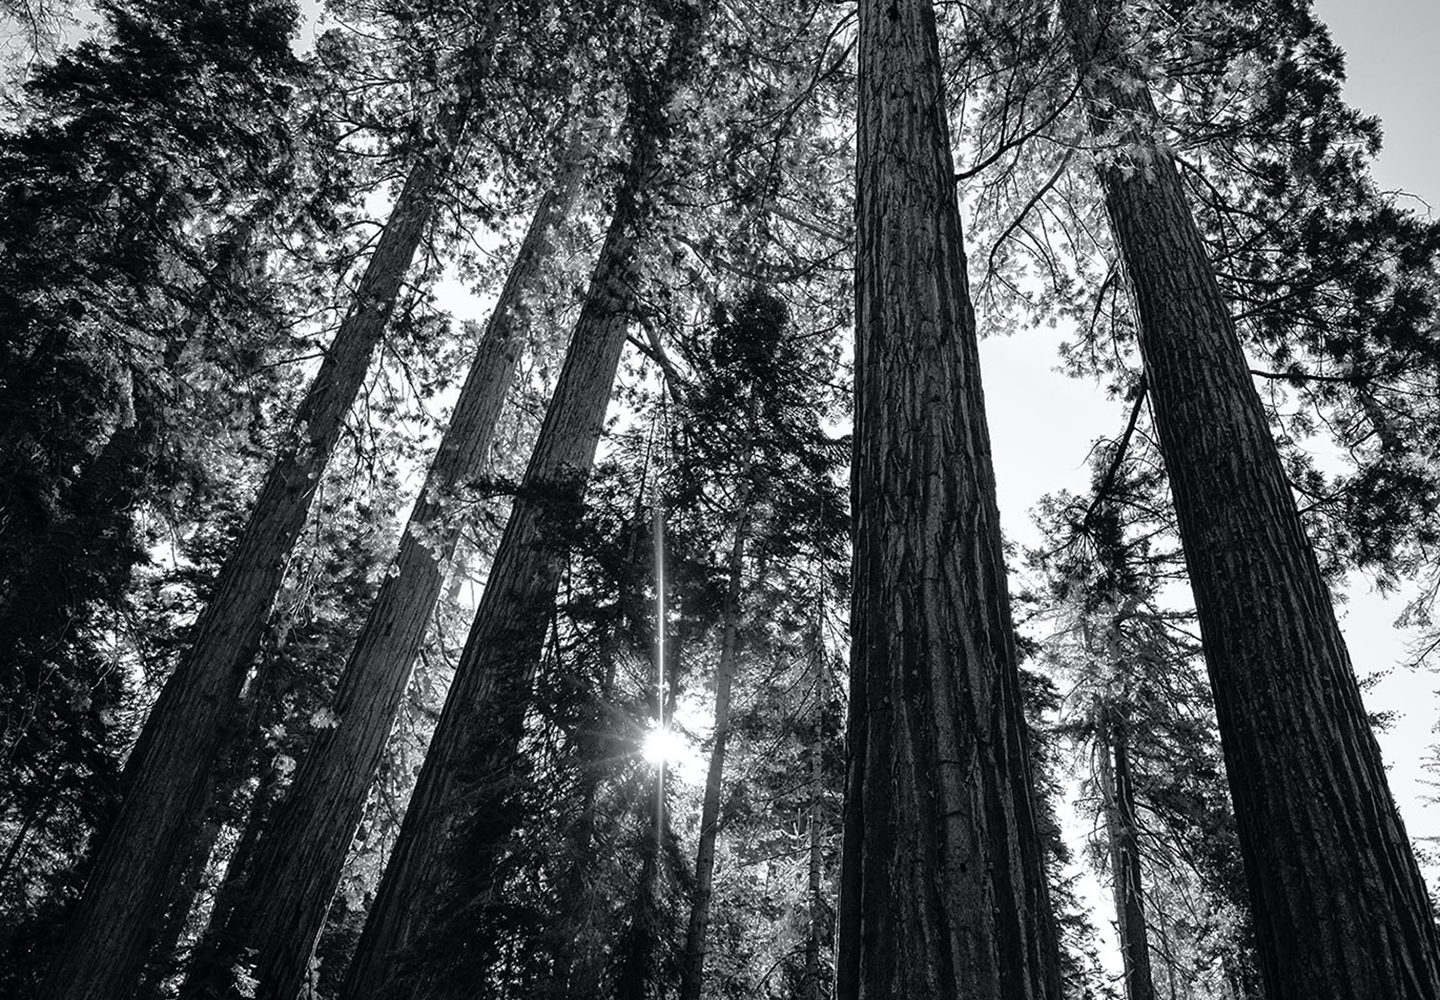 2nd PrizeOpen Mono In Class 2 By John Engle For Sunrise In The Sequoias DEC-2020.jpg